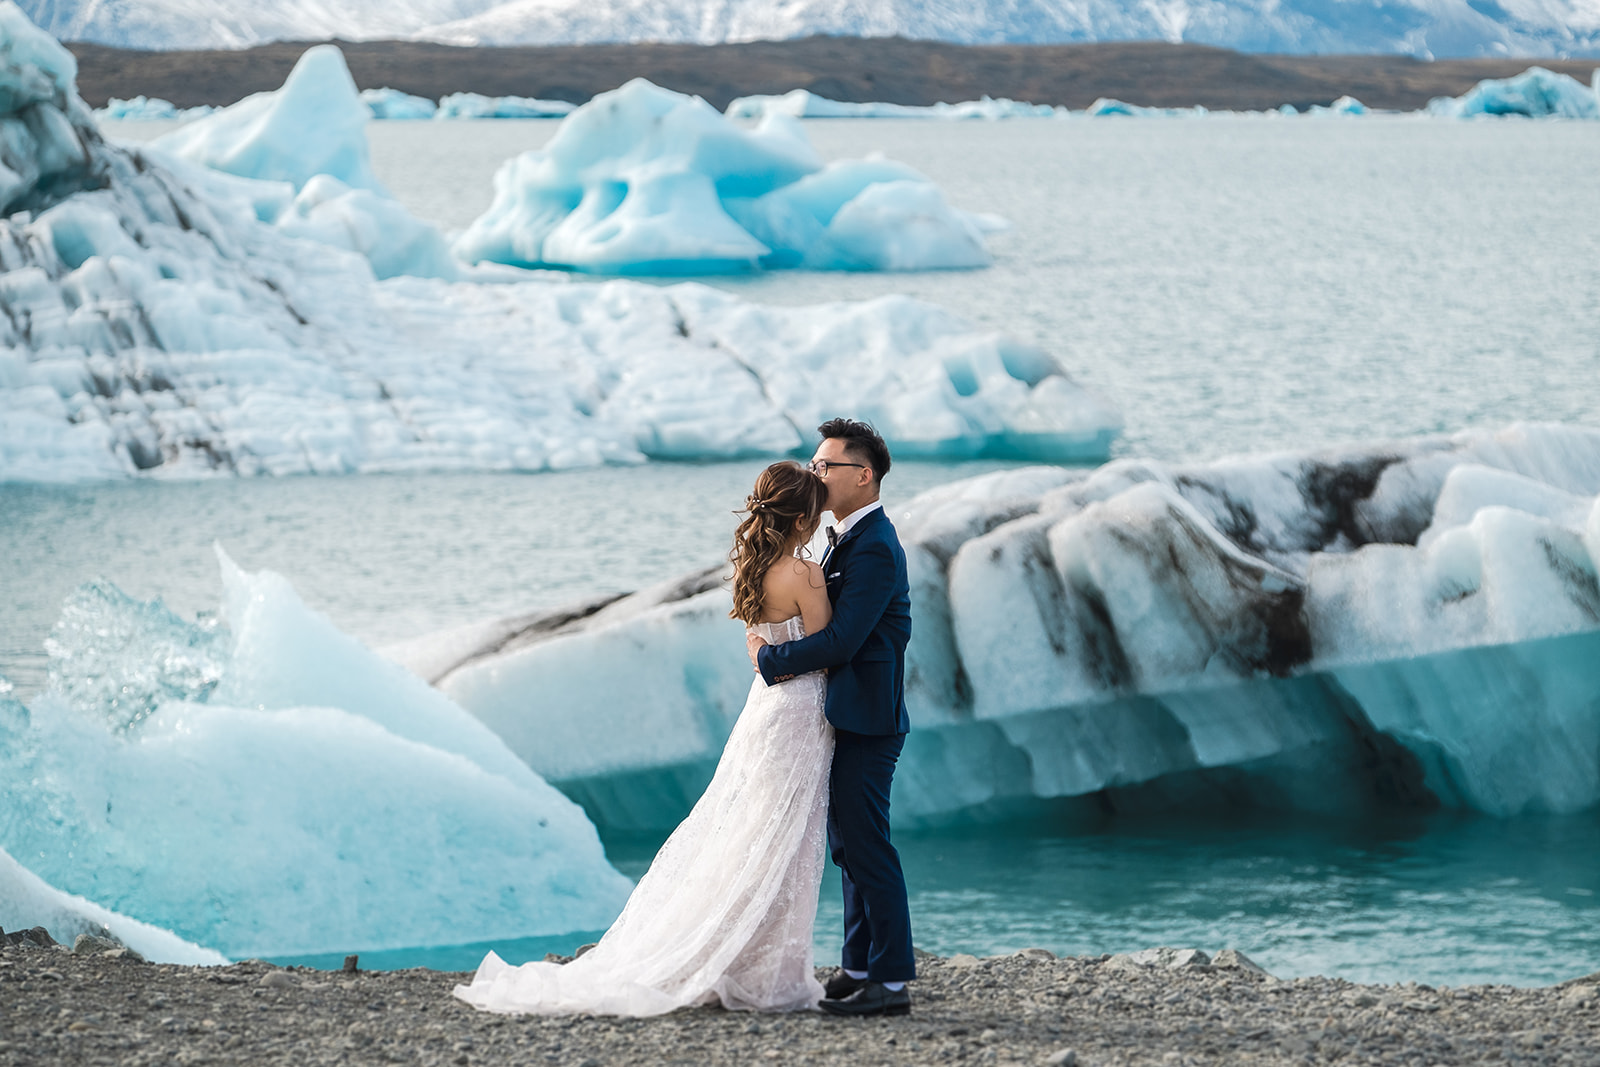 A couple standing in front of Icebergs Pre-wedding Adventure Session at Jökulsárlón Glacier Lagoon in Iceland